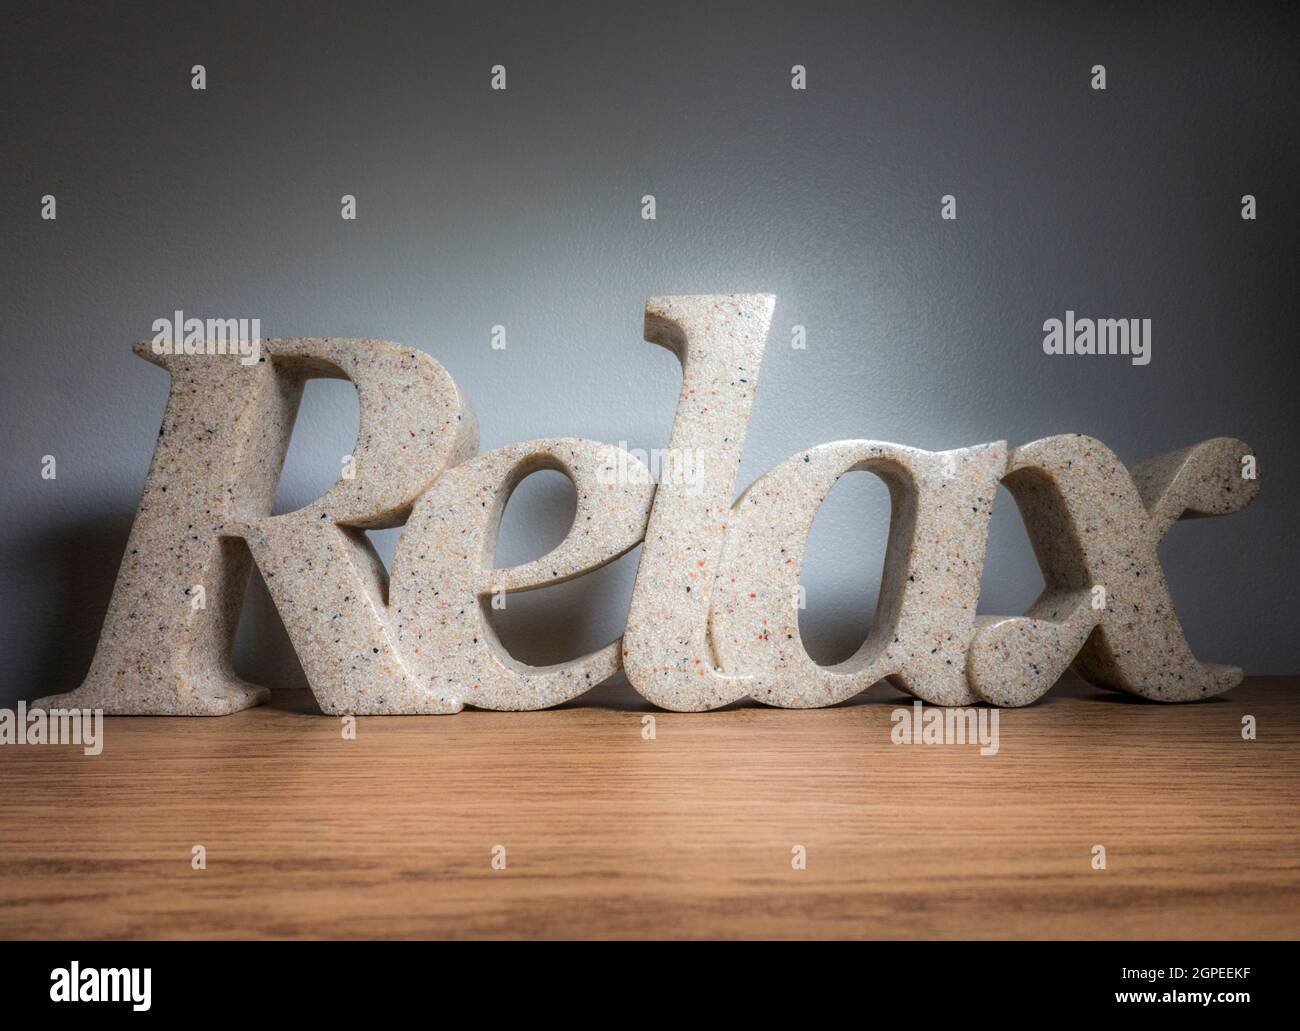 Closeup POV shot of a stone ornament spelling the word Relax, standing on a shelf against an interior wall. Relaxation at home concept. Stock Photo